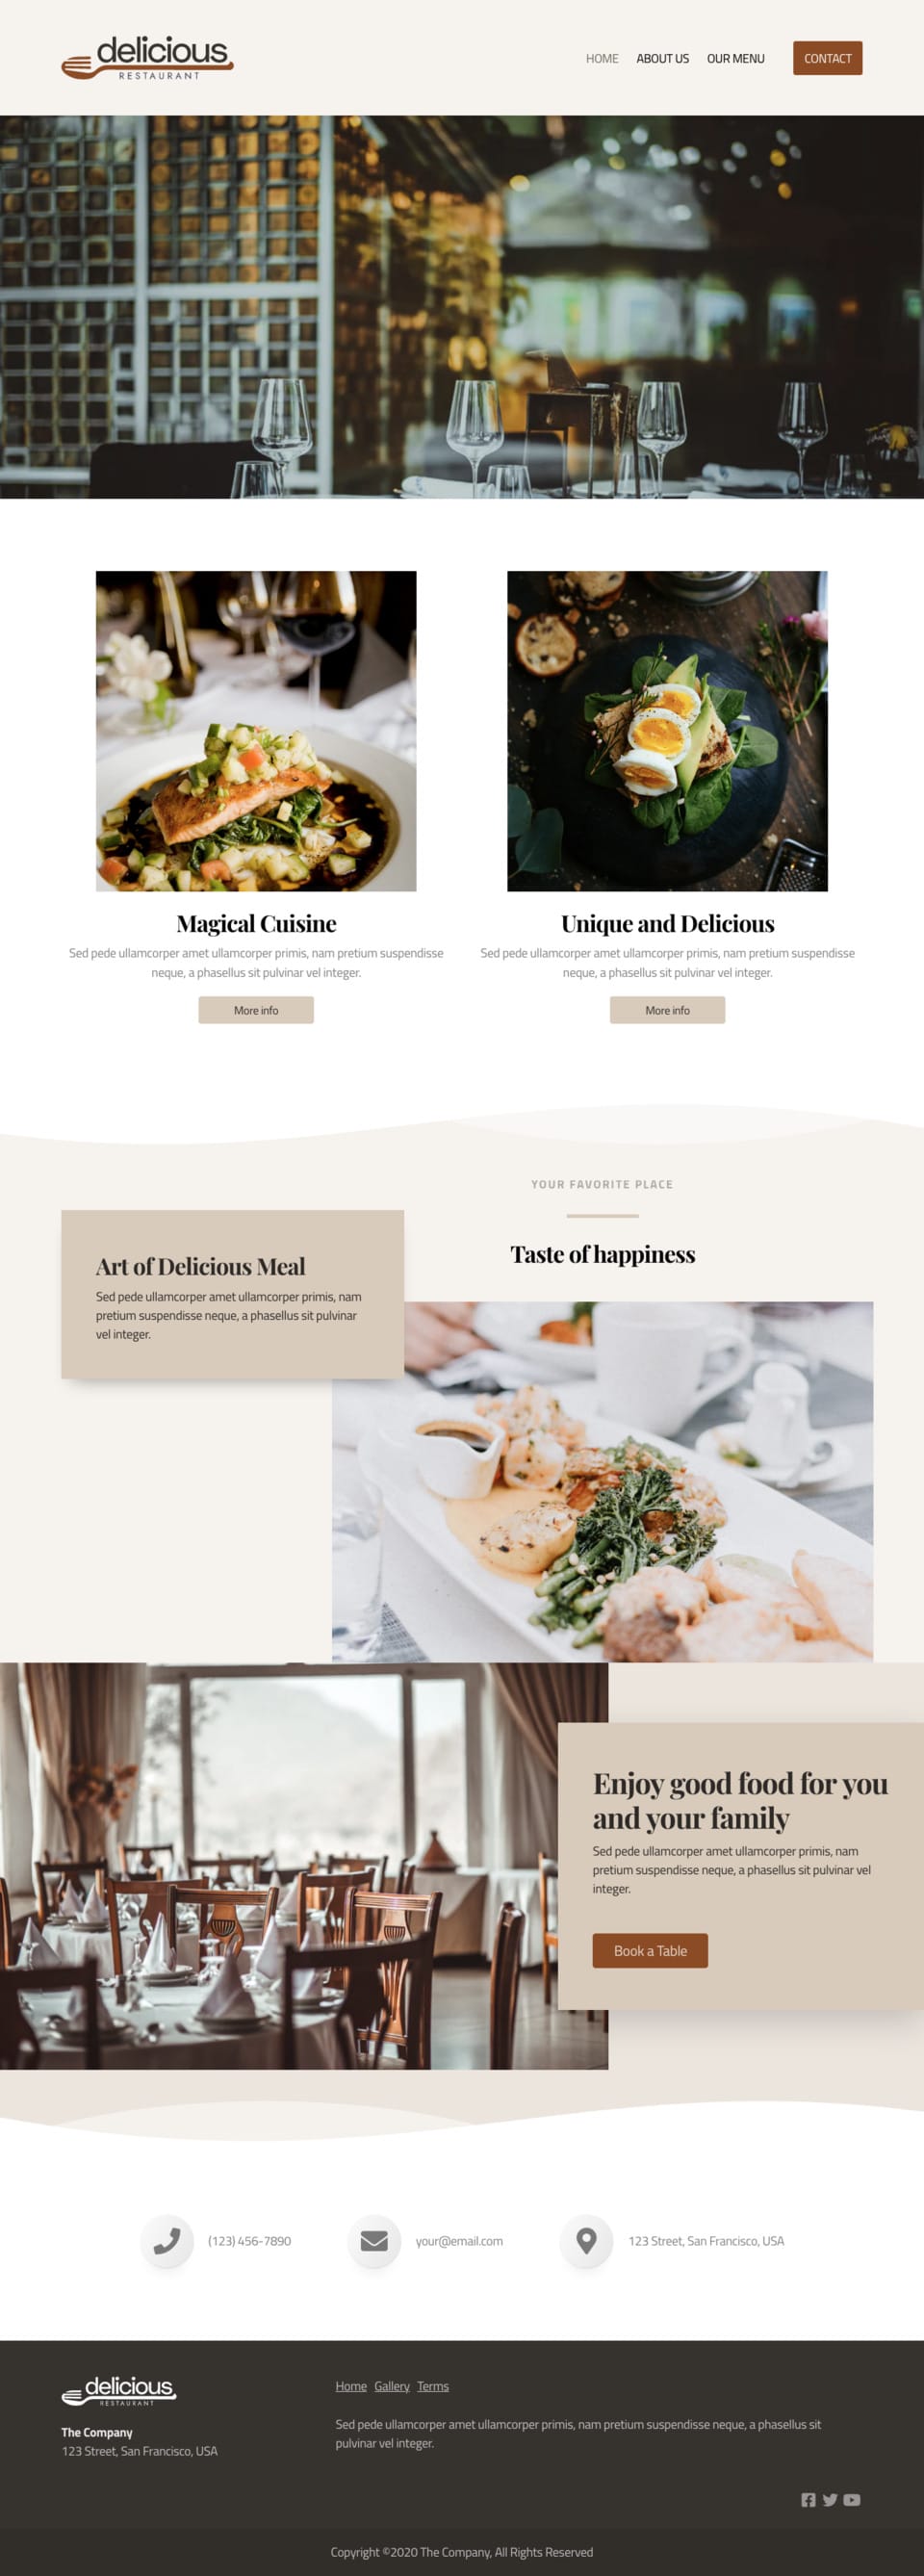 Delicious Website Template - Ideal for small businesses, restaurants, cafes, food bloggers, and anyone wanting a visually appealing website without the hassle of coding.